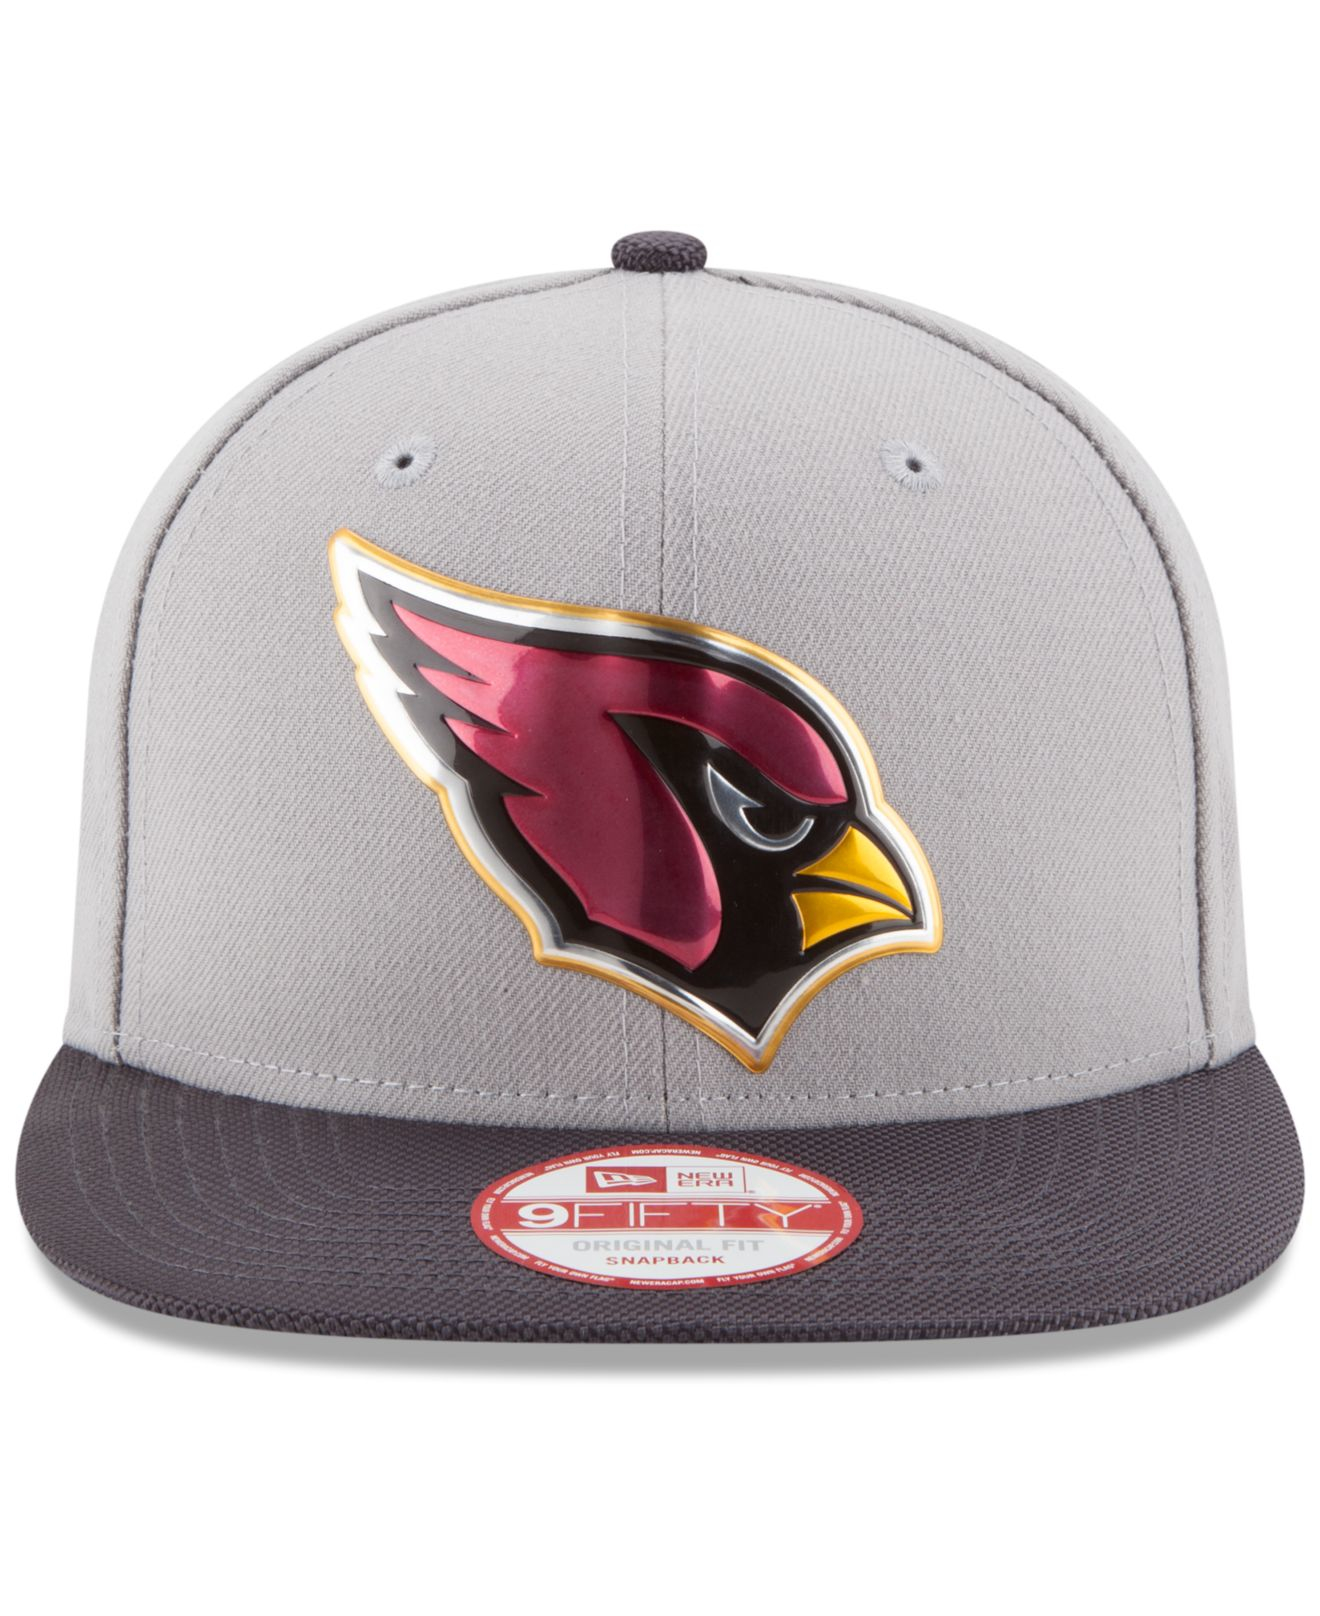 Lyst - Ktz Arizona Cardinals Gold Collection 9fifty Snapback Cap in ...